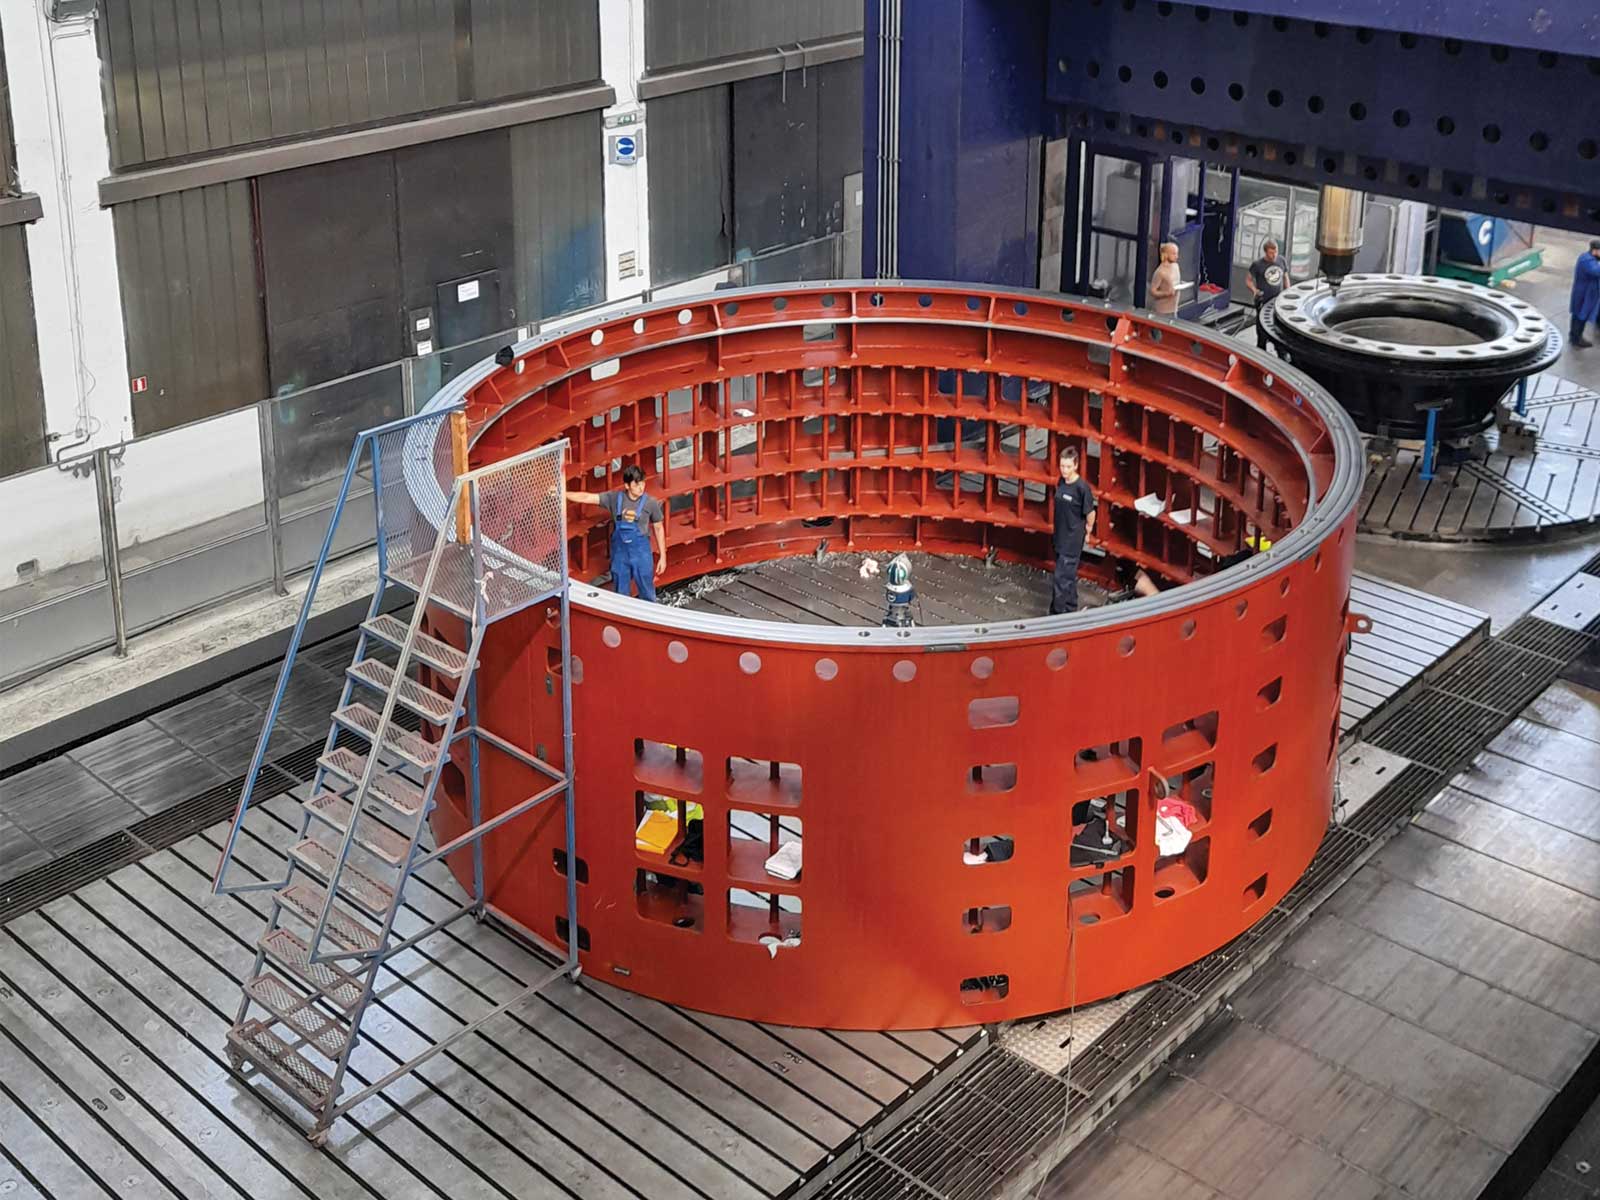 We delivered one of the largest stator housings to a customer in France